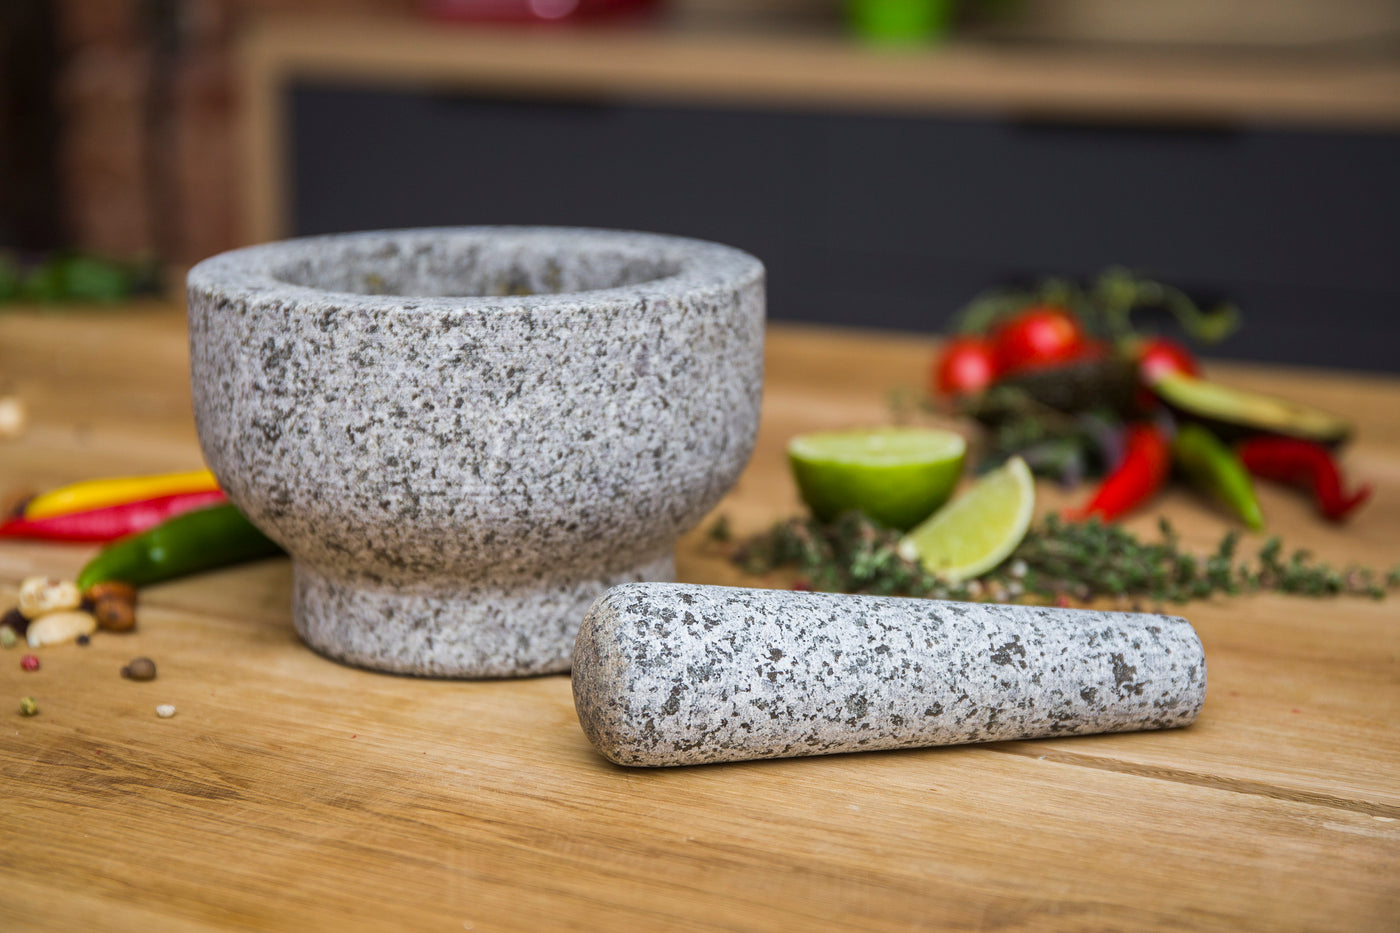 ChefSofi EXTRA Large 8 Inch 5 Cup-Capacity Mortar and Pestle Set - One Huge  Mortar and Two Pestels: 8.5 inch and 6.5 inch - Unpolished Heavy Granite